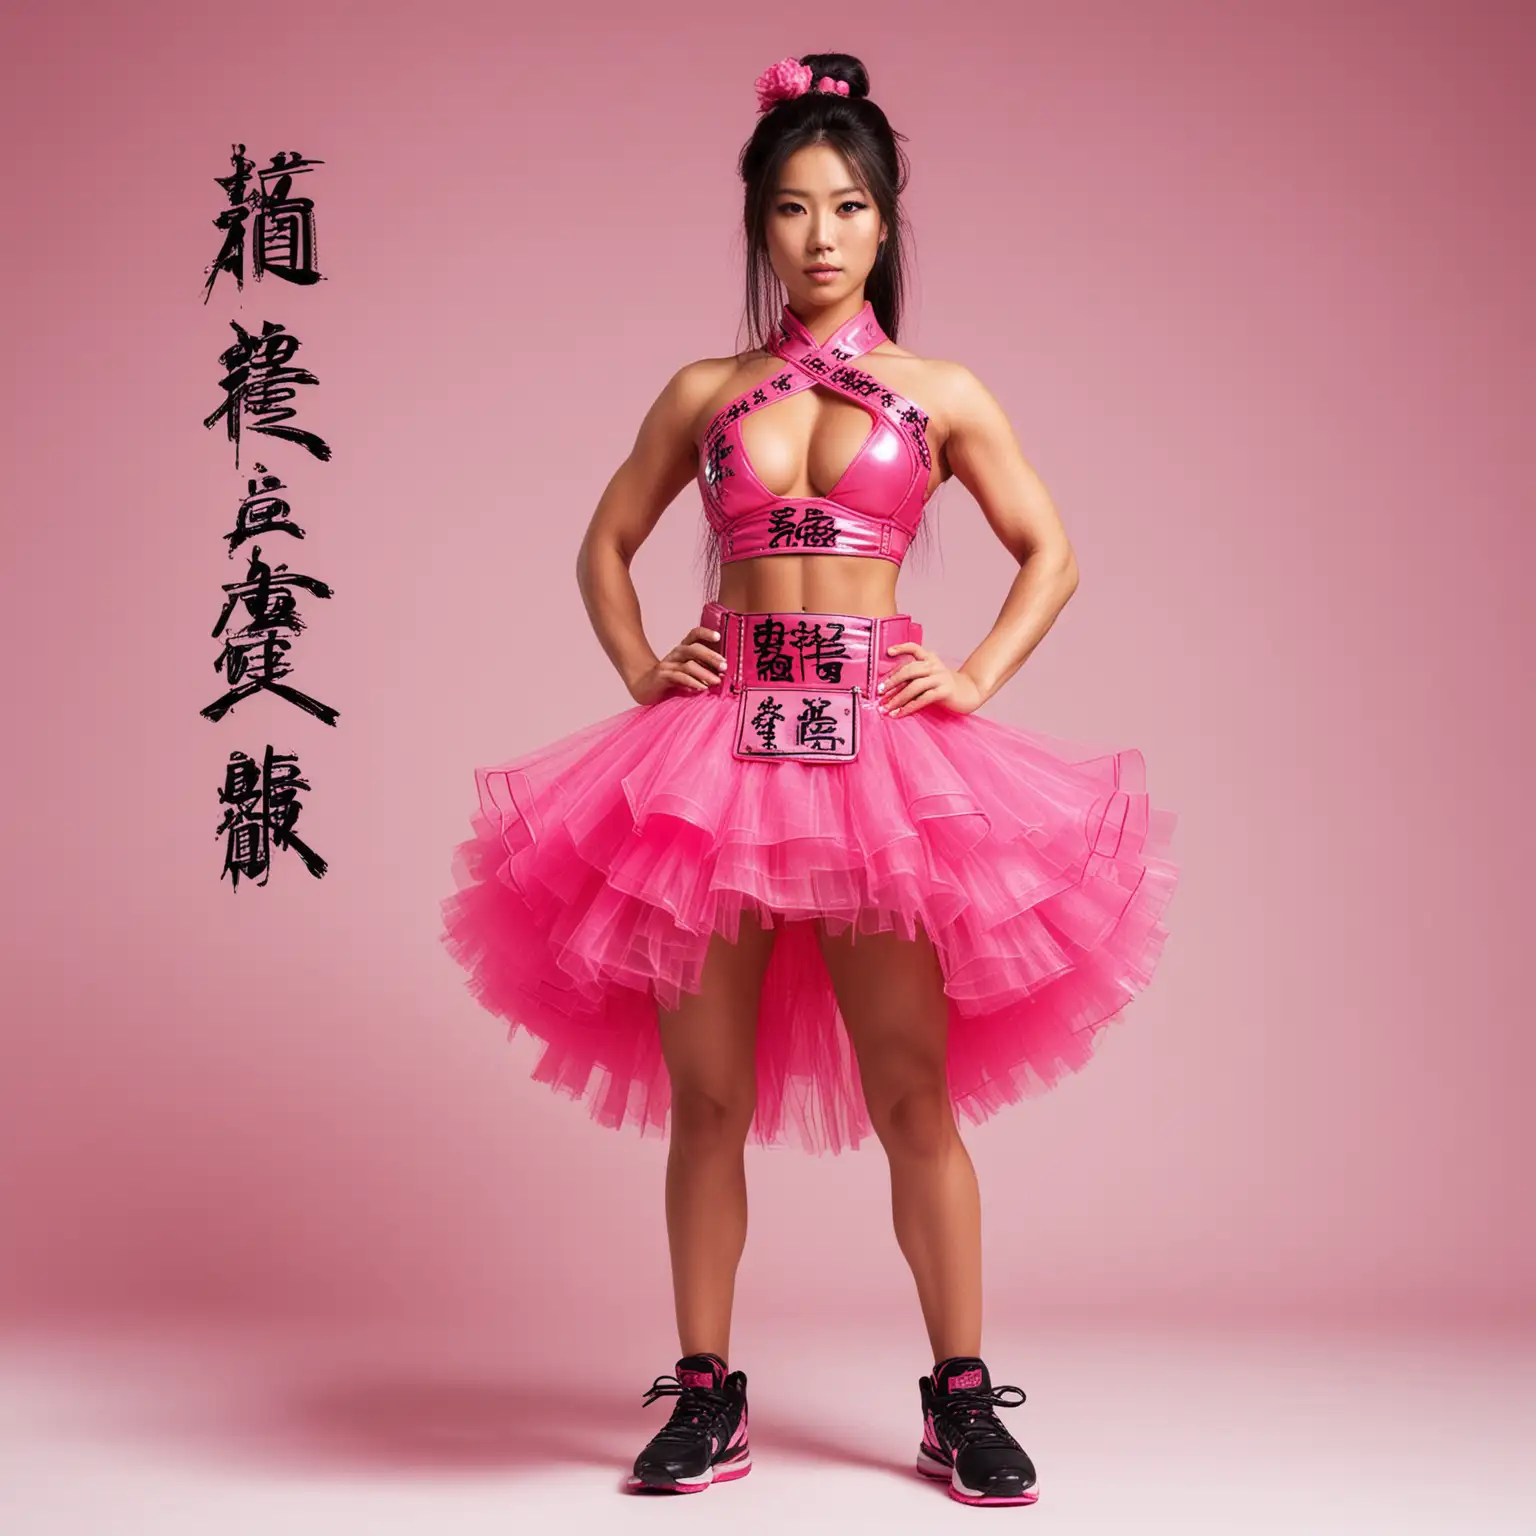 Standing full body view, tall Japanese bodybuilder supermodel, thin waist, large breasts and long legs in sleeveless, hot-pink samurai armor with black chinese writing, giant hot-pink tutu, black sneakers, sneakers, white background